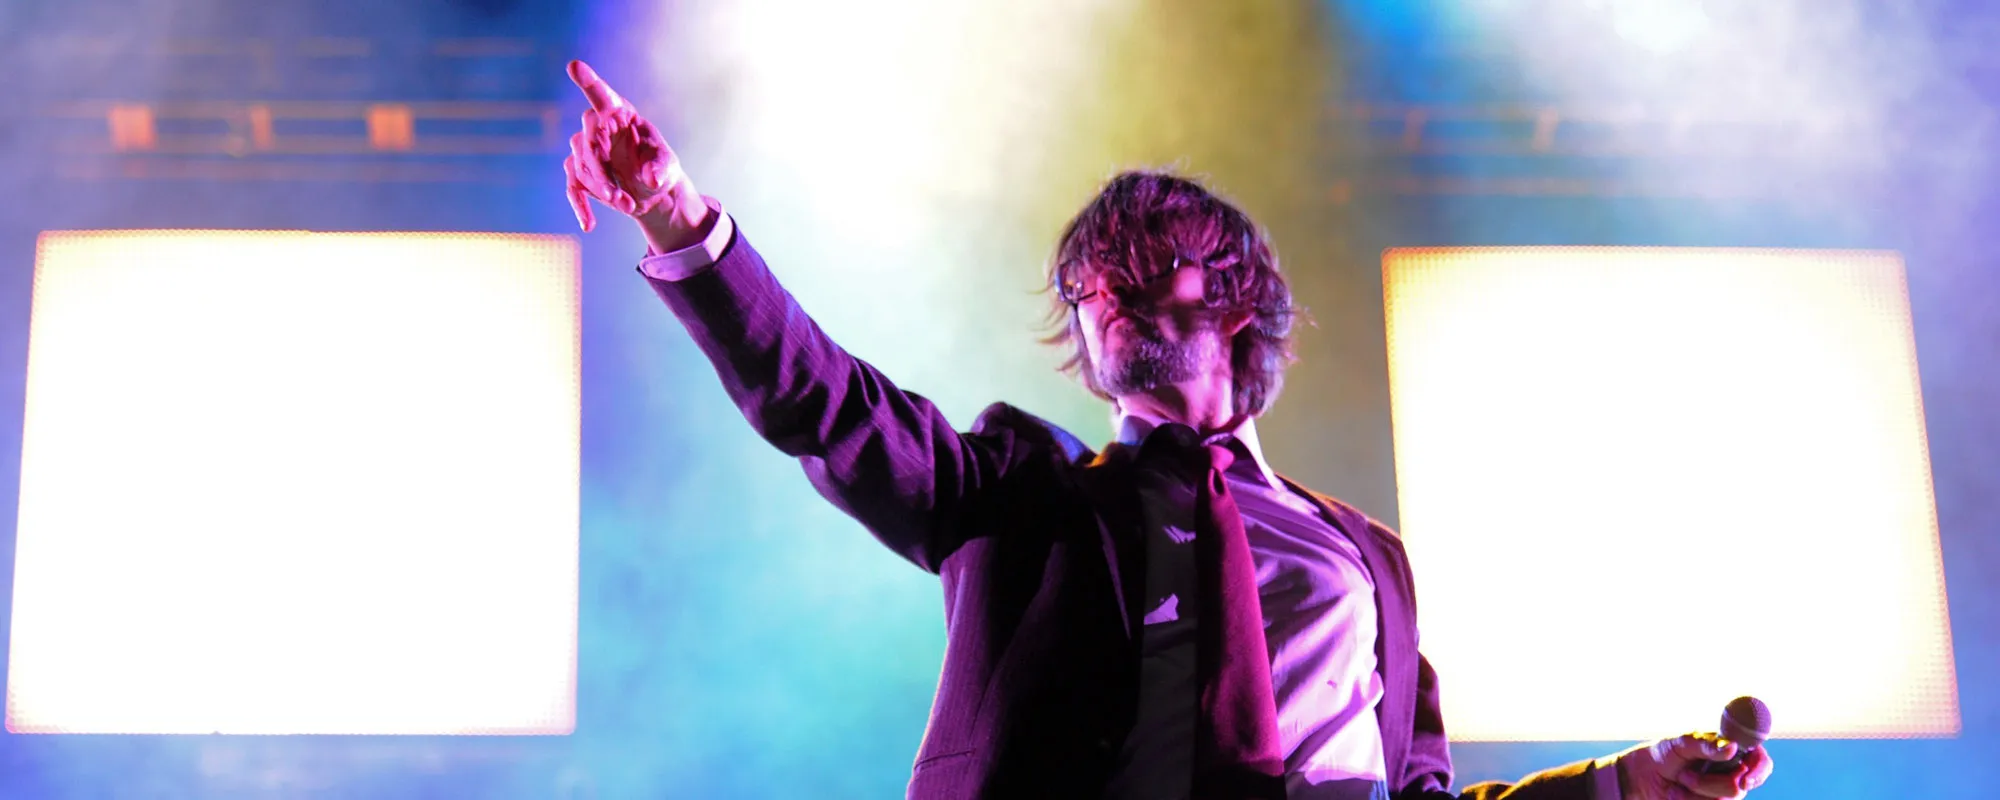 The Working-Class Meaning Behind “Common People” by Pulp